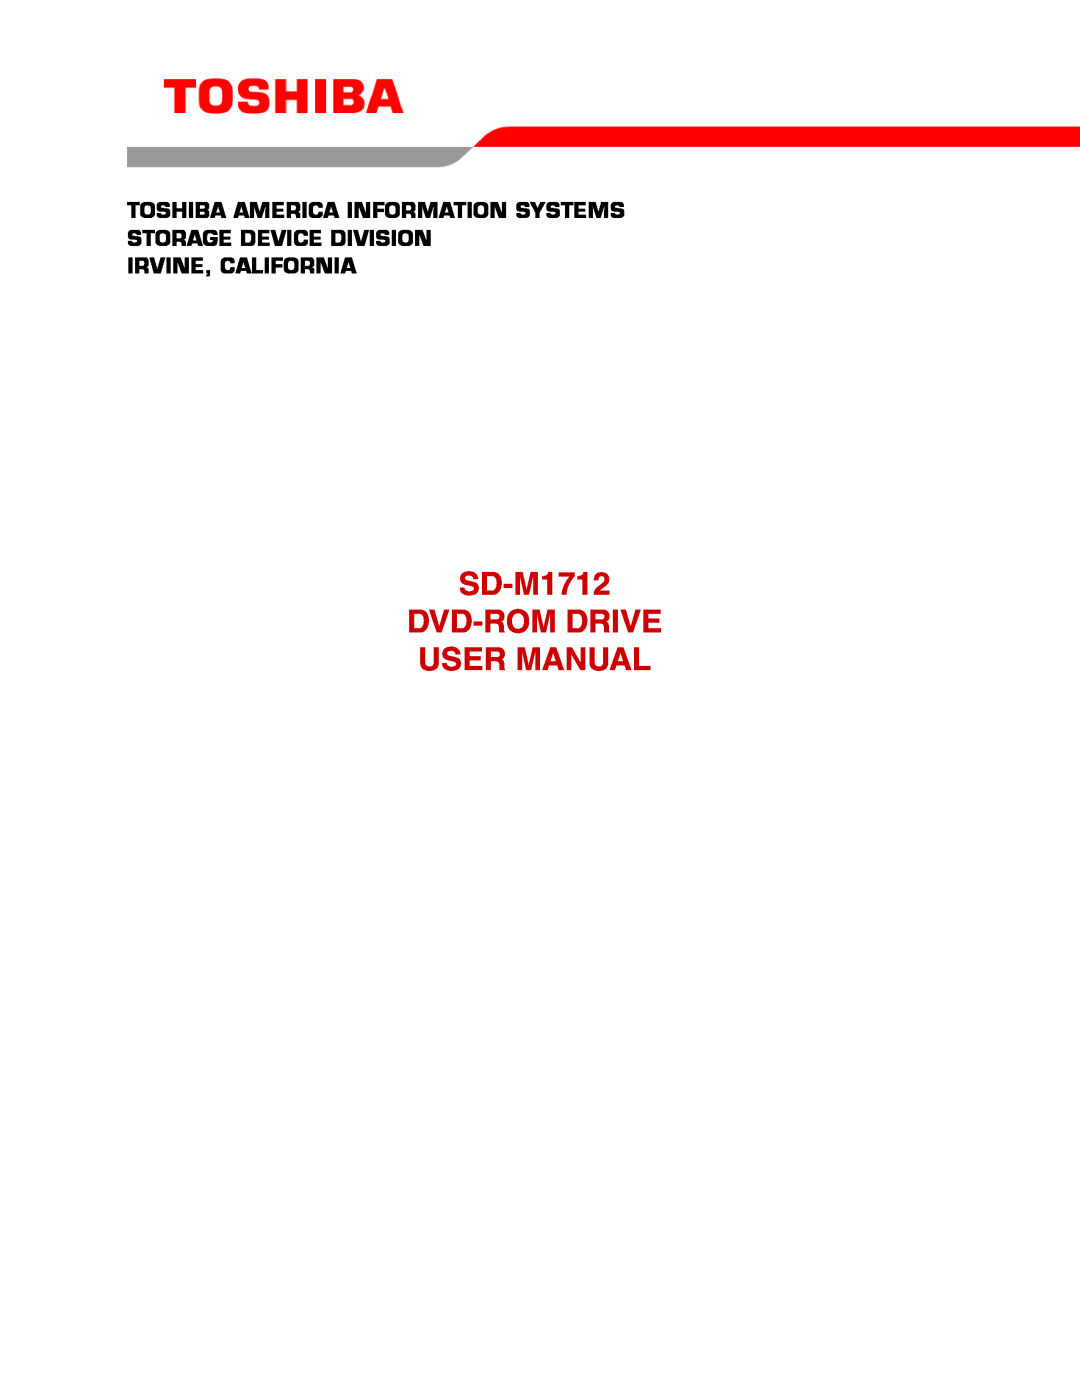 Toshiba user manual SD-M1712 DVD-ROM DRIVE USER MANUAL, Toshiba America Information Systems Storage Device Division 